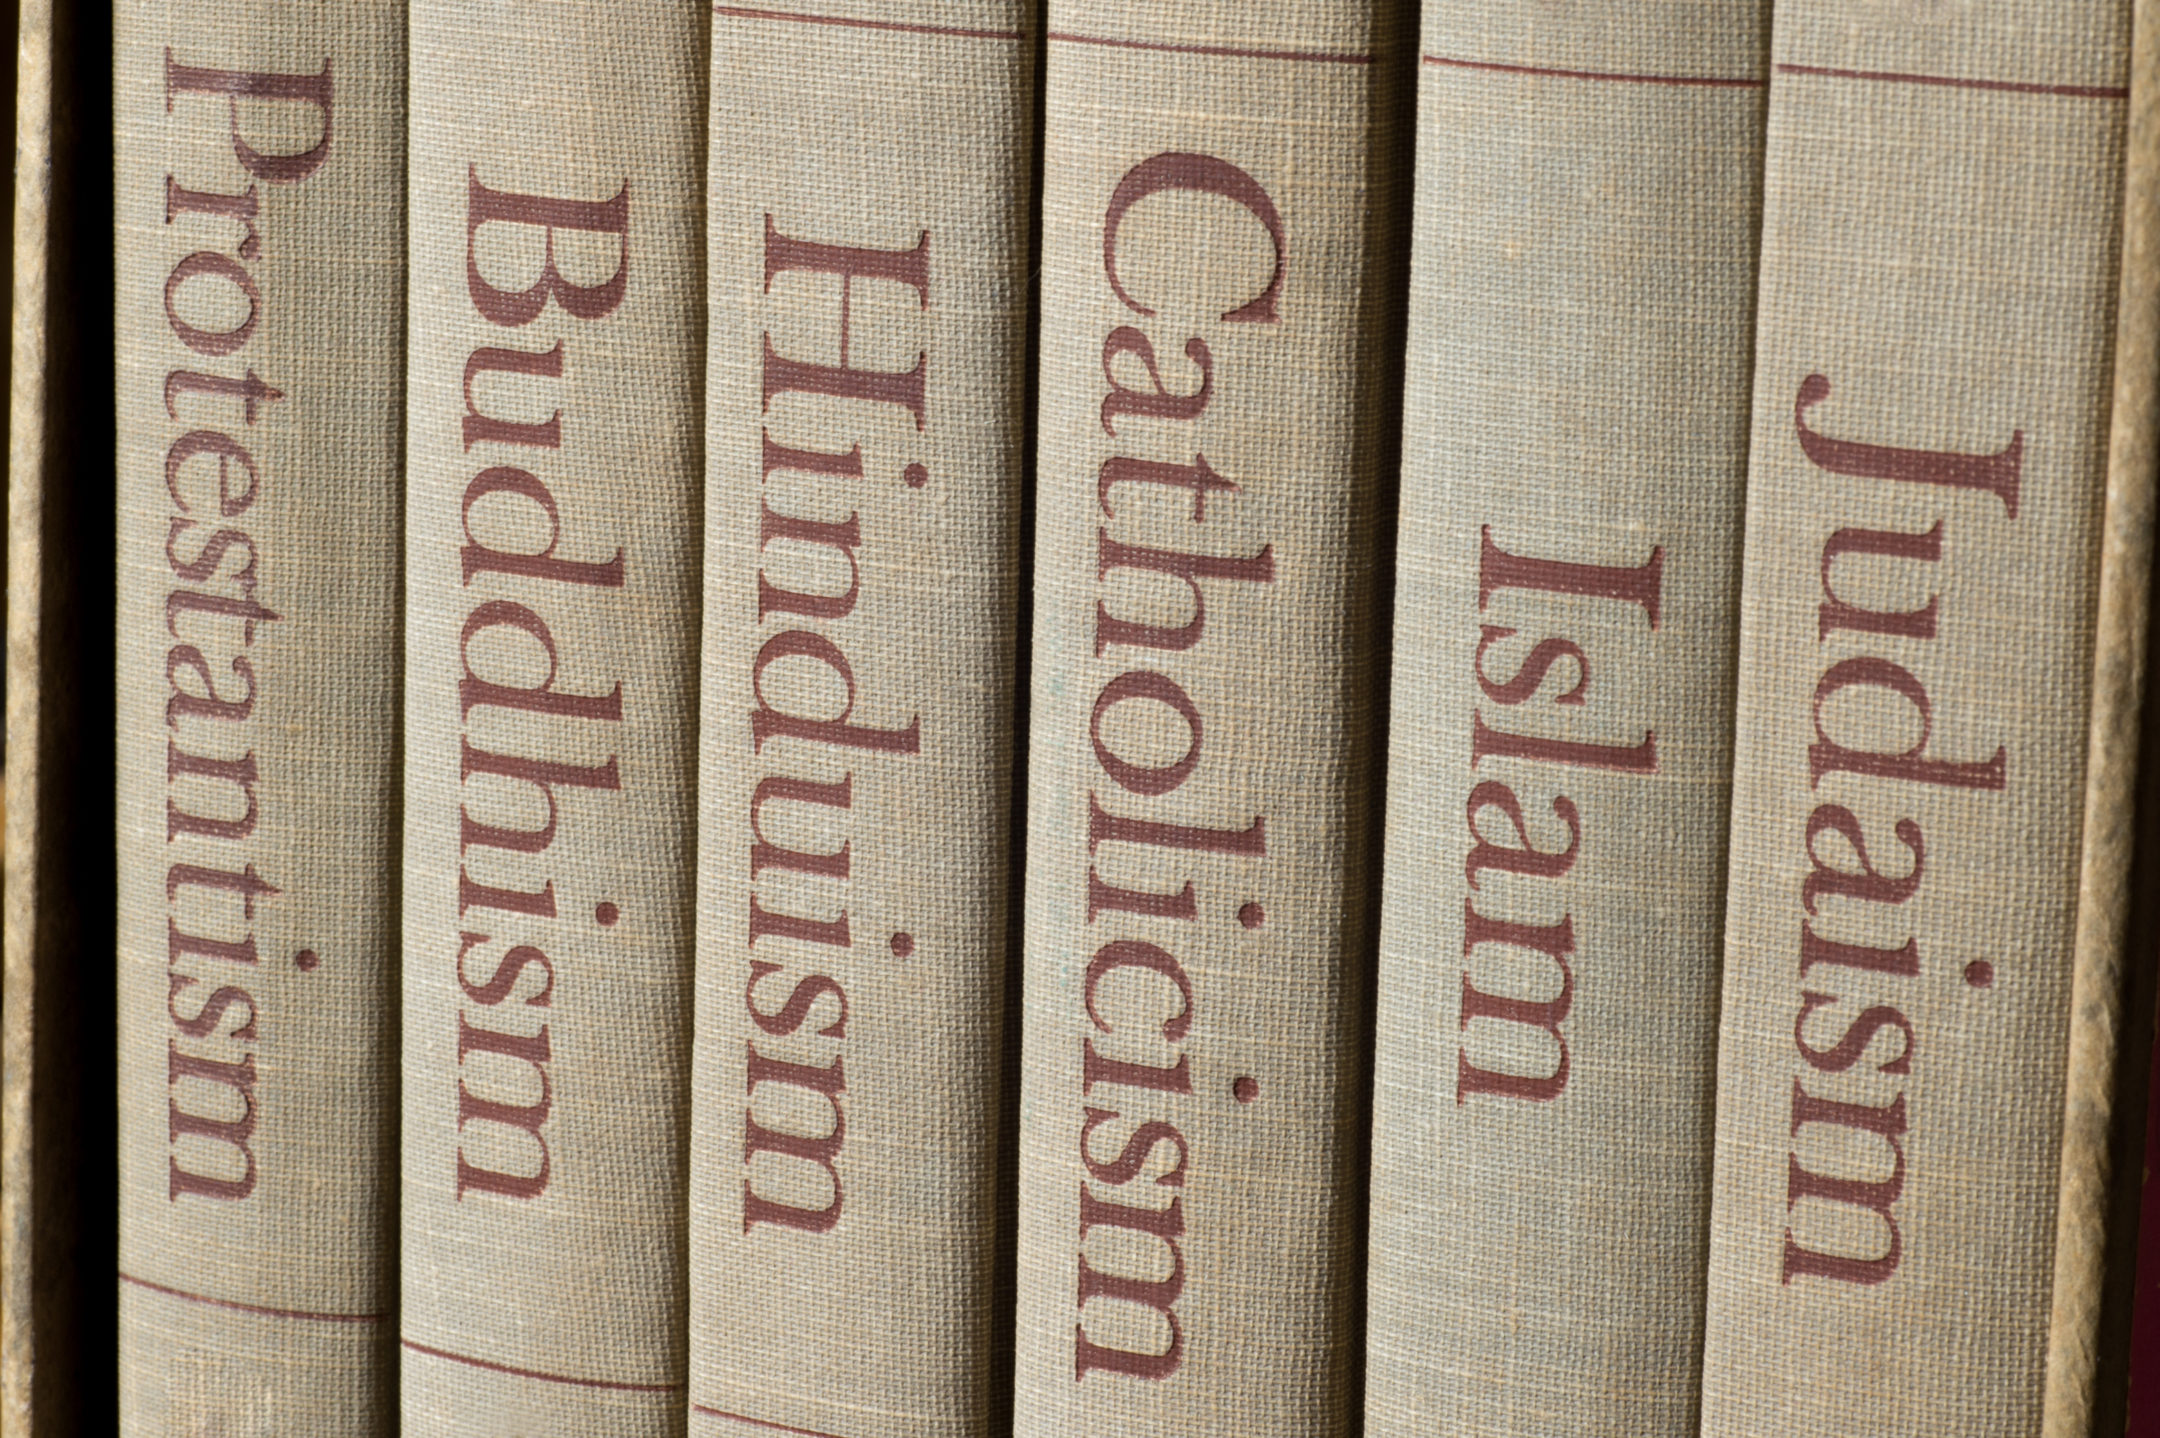 Book spines listing major world religions